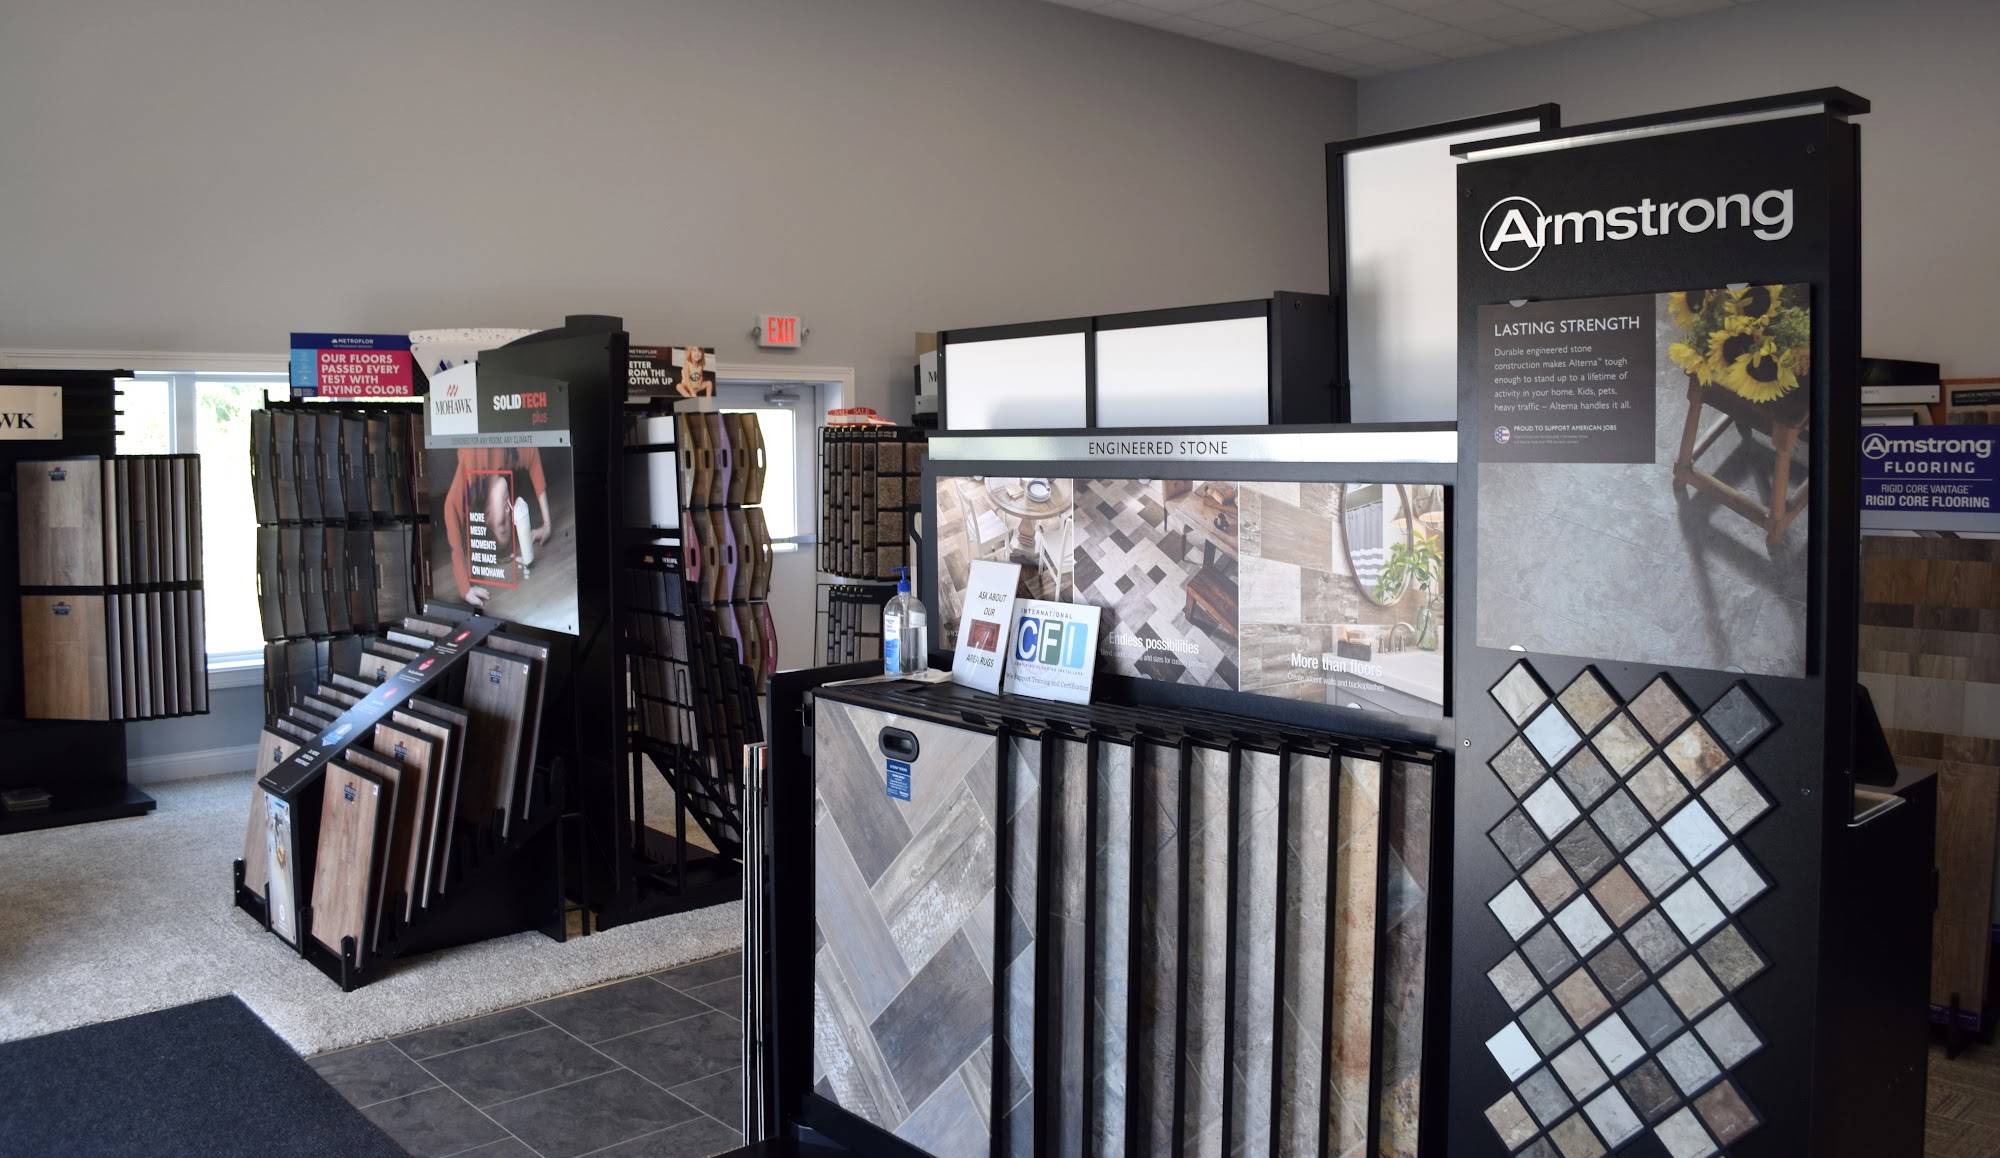 Hicks & Sons Floor Coverings 2740 E County Rd 900 S, Cloverdale Indiana 46120